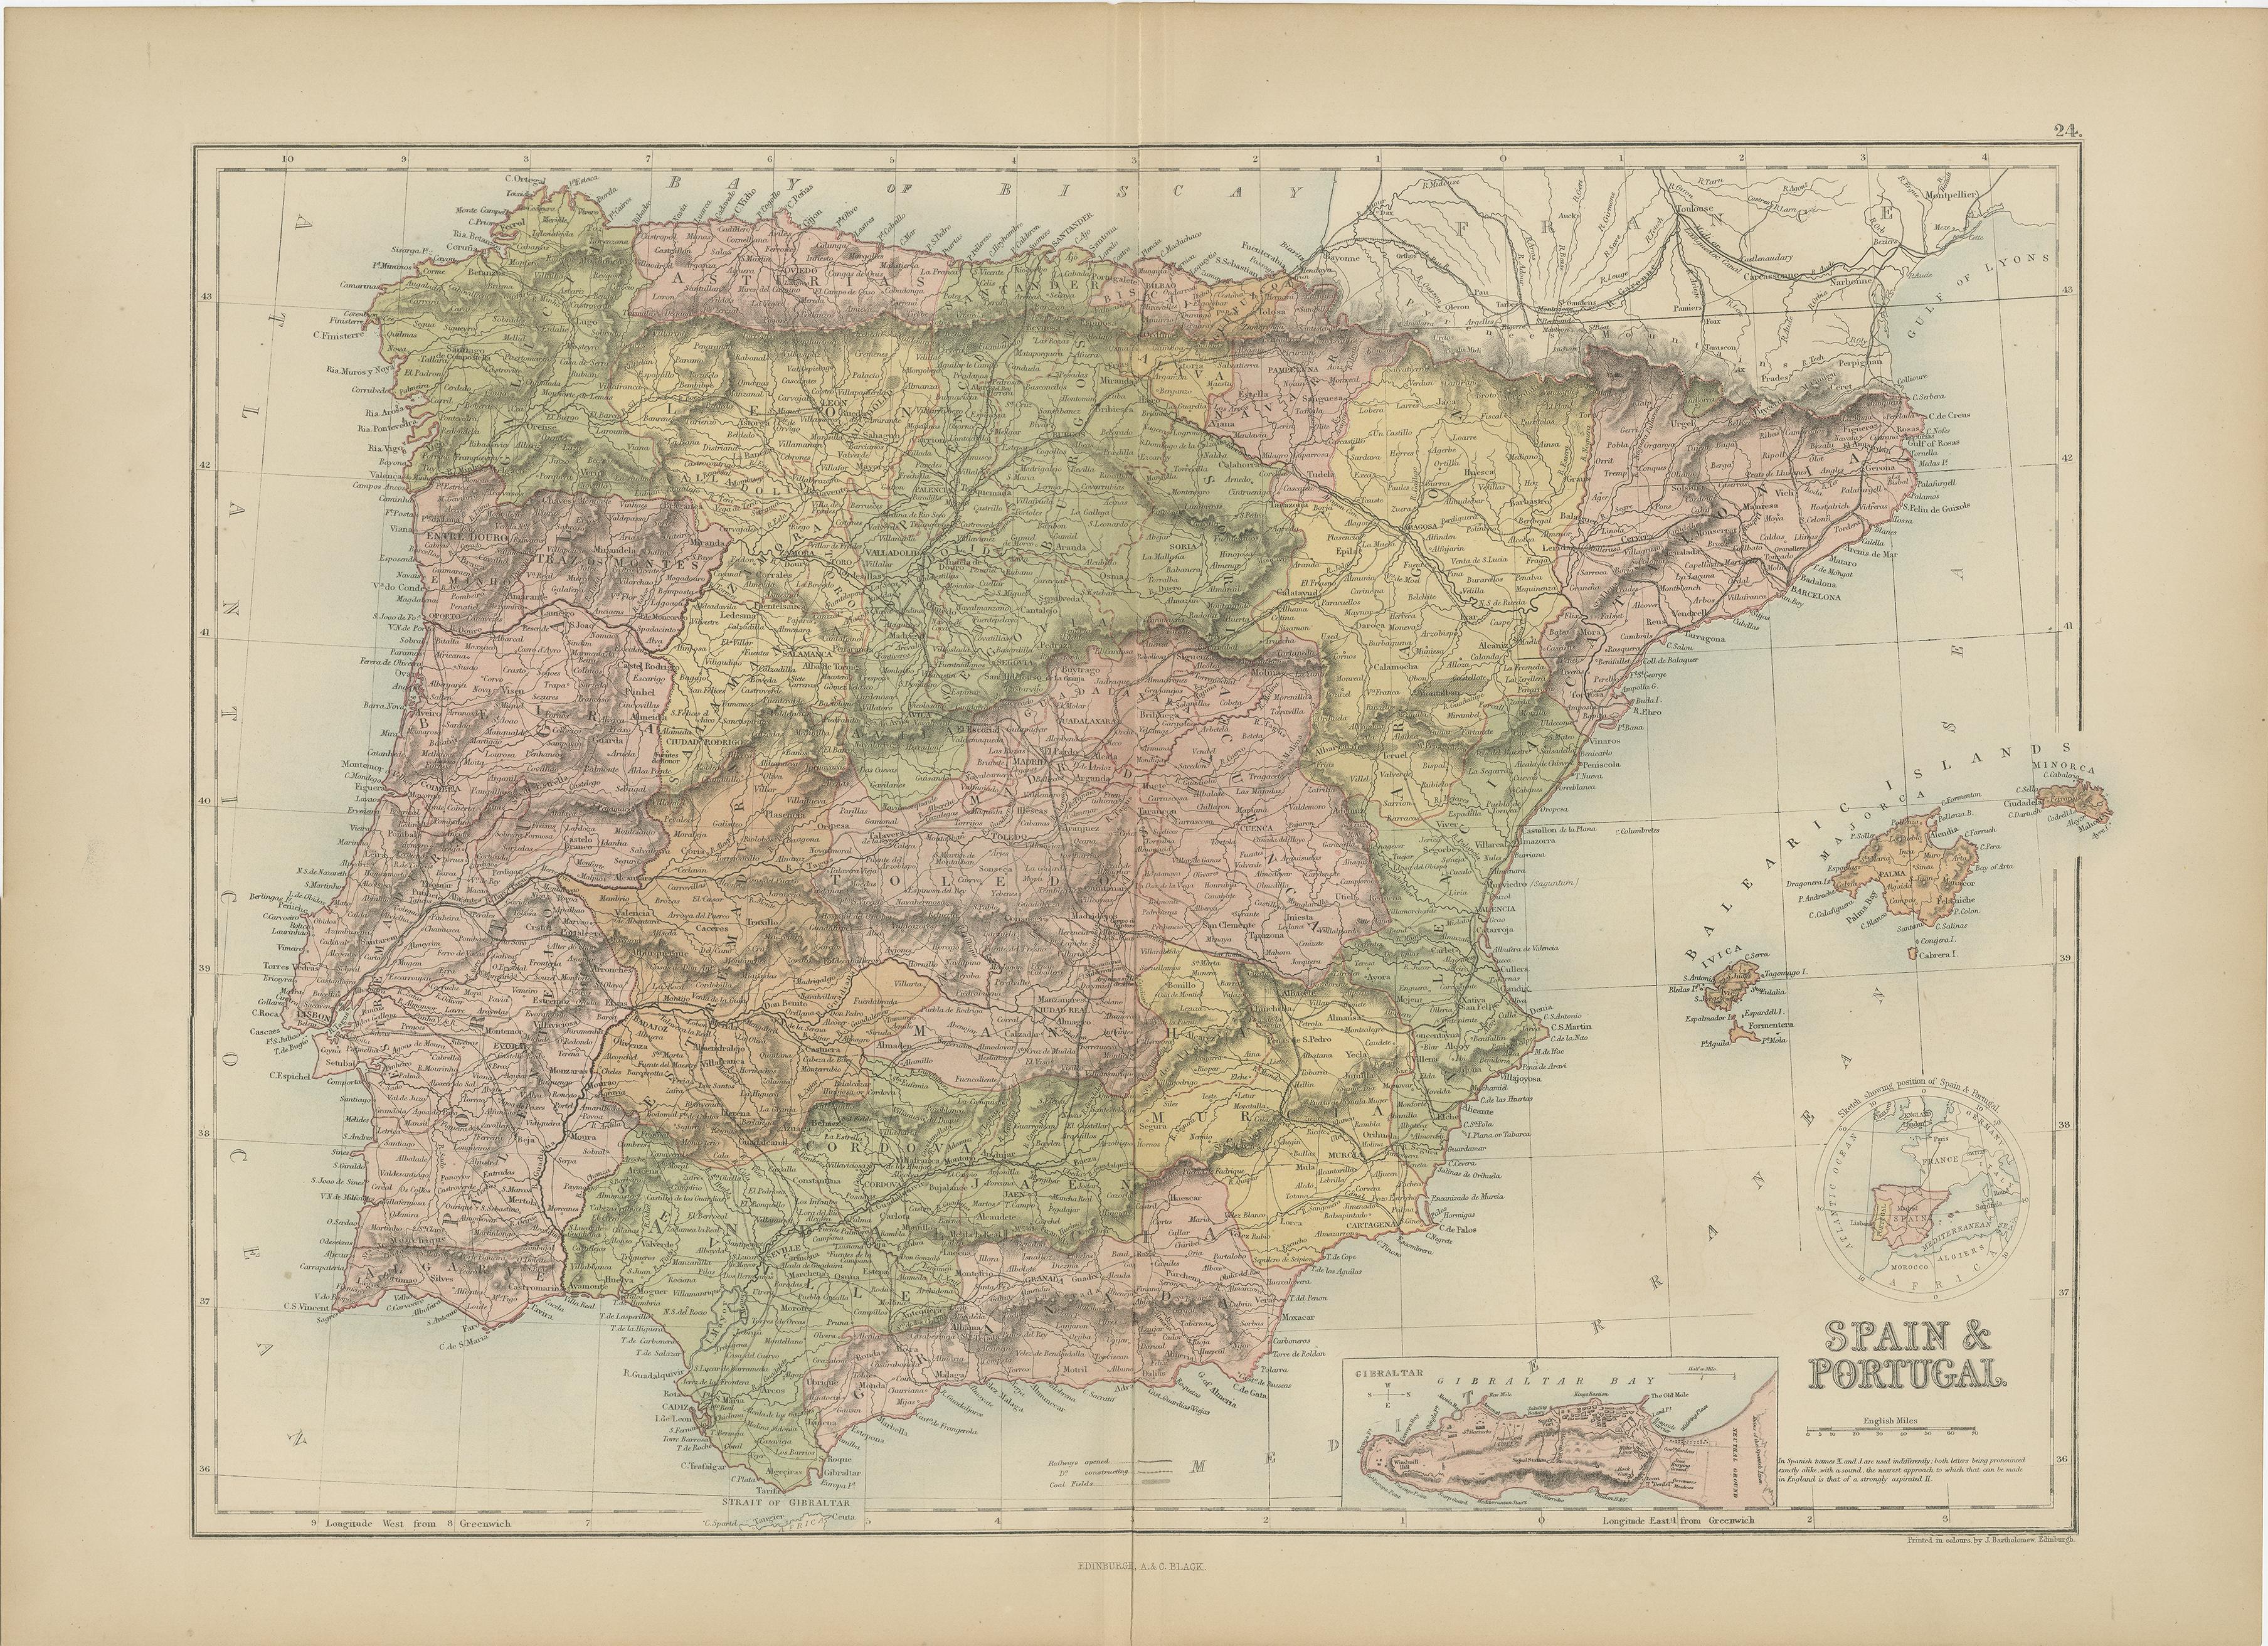 Antique map titled 'Spain and Portugal'. Original antique map of General map of Spain and Portugal with inset map of Gibraltar. This map originates from ‘Black's General Atlas of The World’. Published by A & C. Black, 1870.